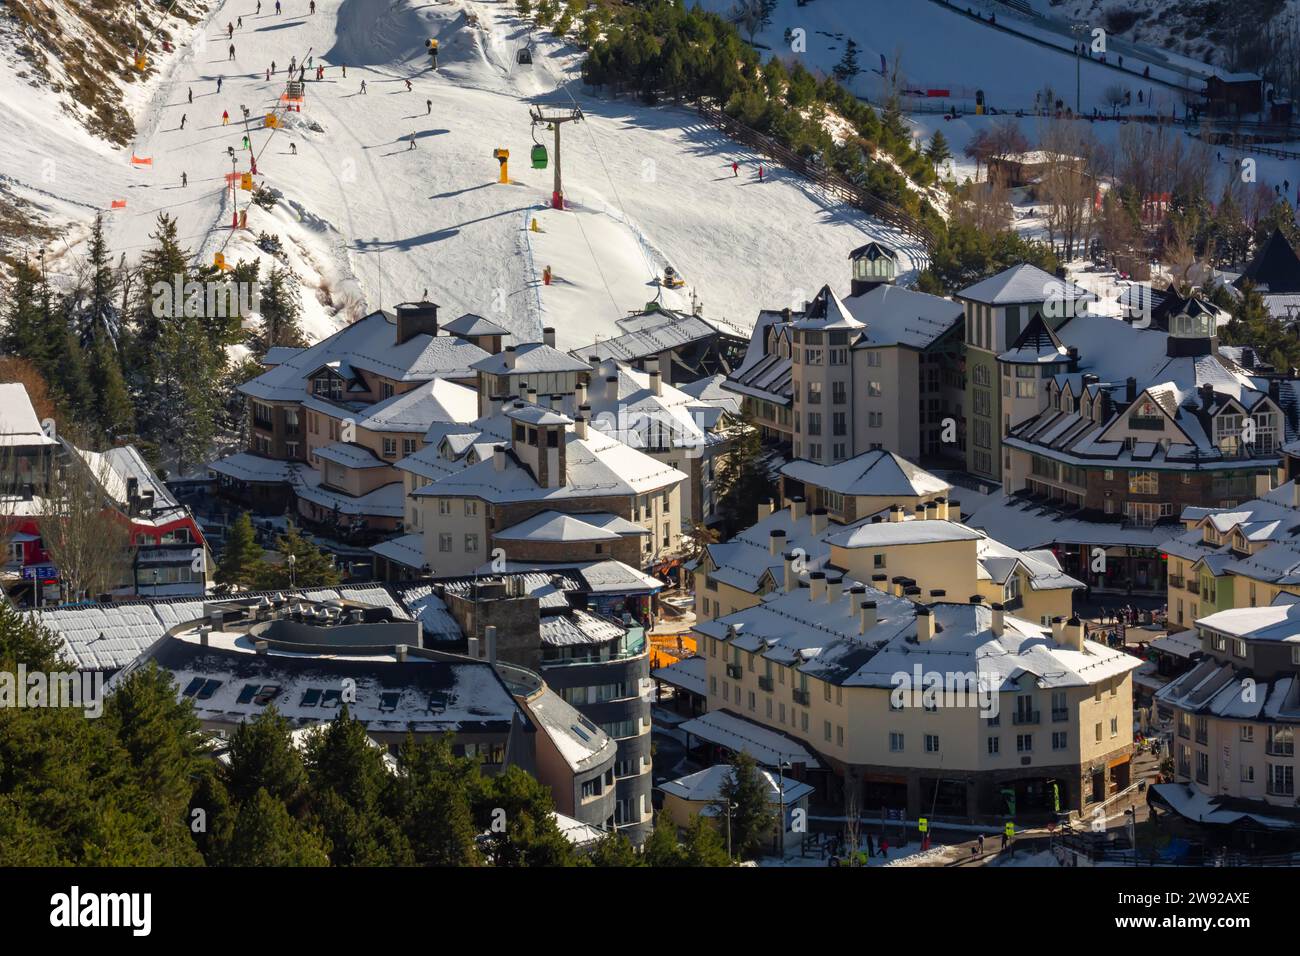 A mountain village nestled among snow-covered slopes with ski runs and alpine buildings Stock Photo